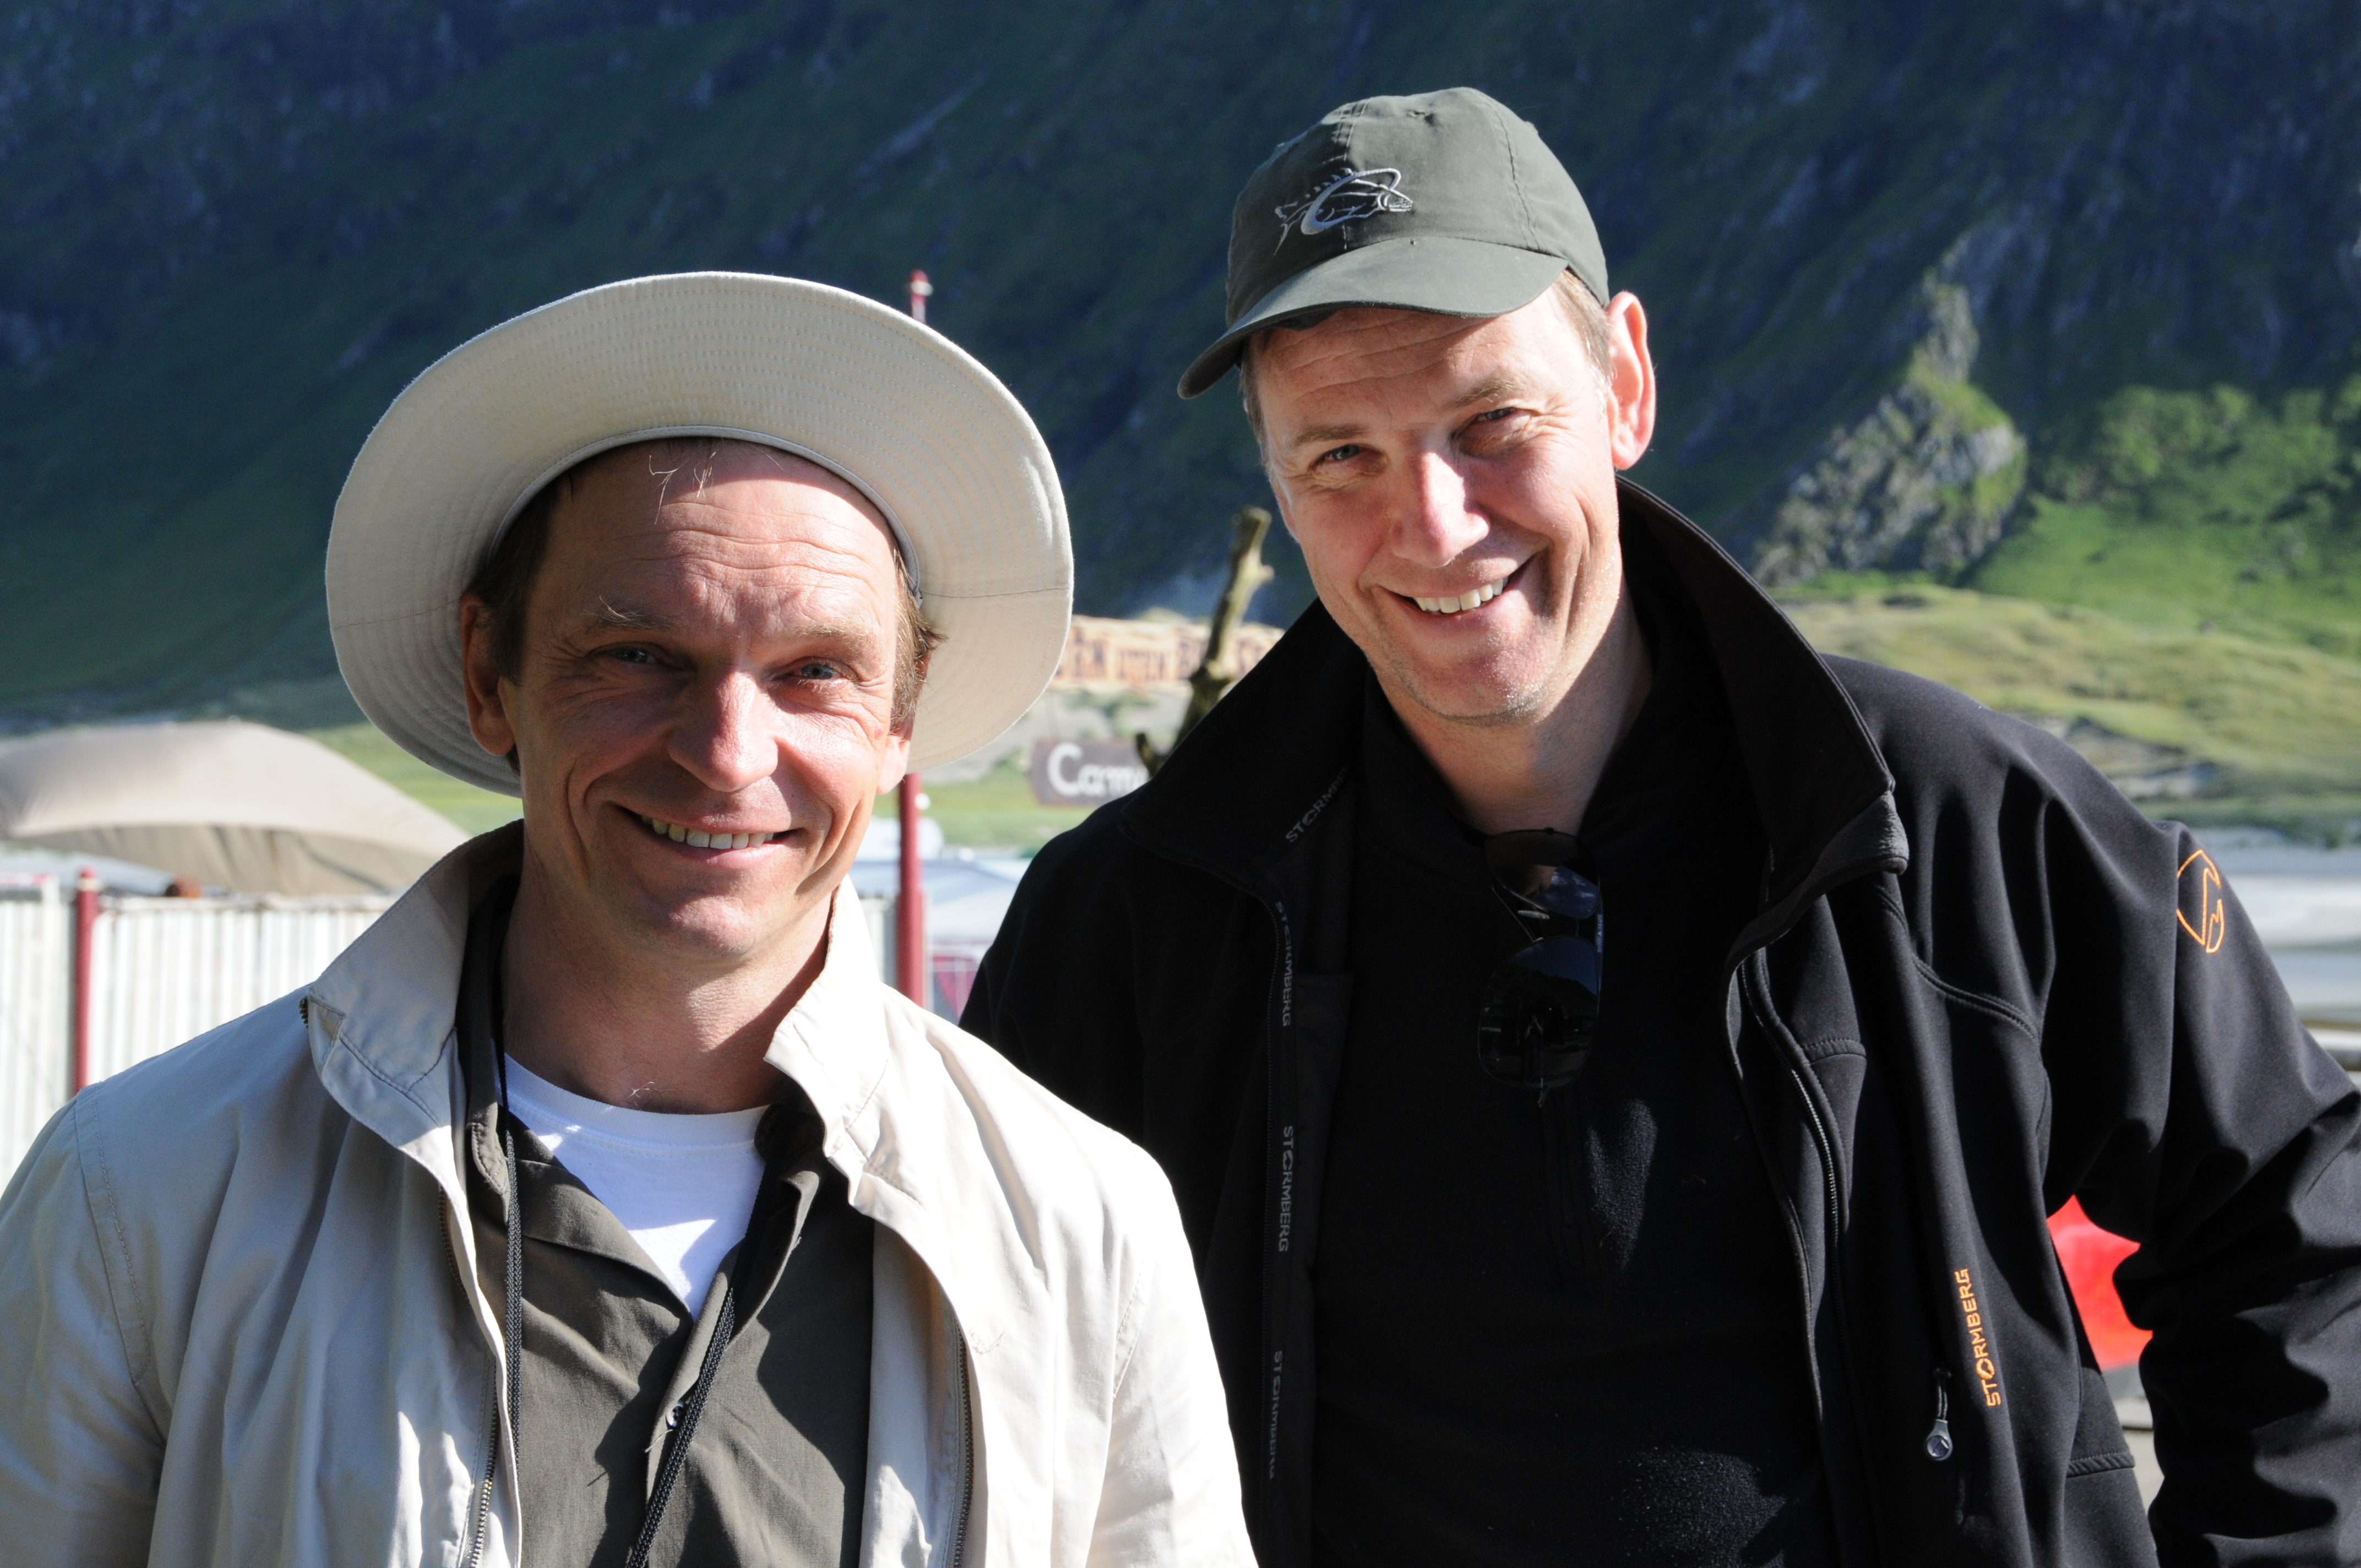 German feature, Ein Mann, Ein Fjord. Shooting B-camera on the west coast of Norway with former AFI classmate, the late Martin Kukula.